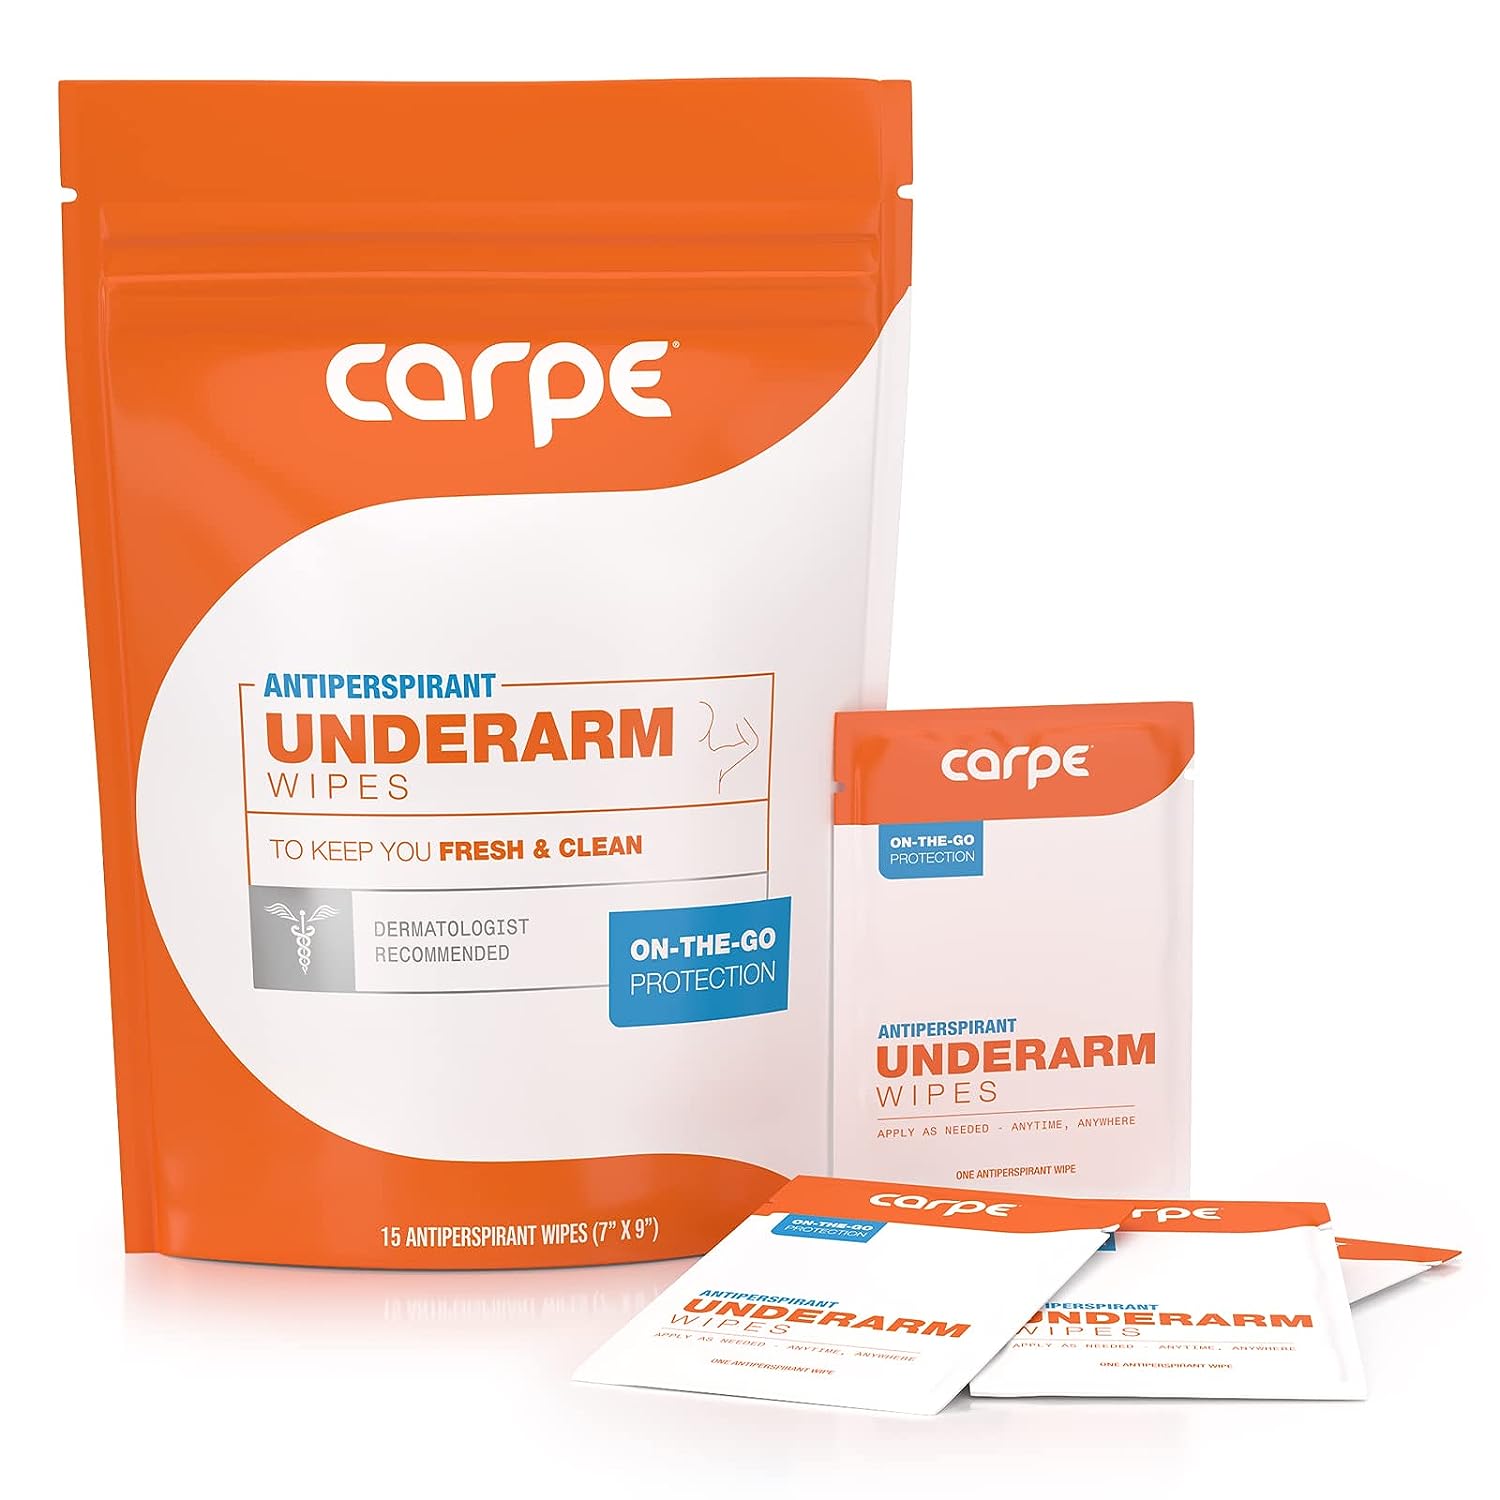 Carpe Antiperspirant Underarm Wipes for Sweat Blocking, Deodorizing, and Cleansing When You’re On the Move - 15 Residue Free, Individually Wrapped Wipes - Clean and Refreshing Scent